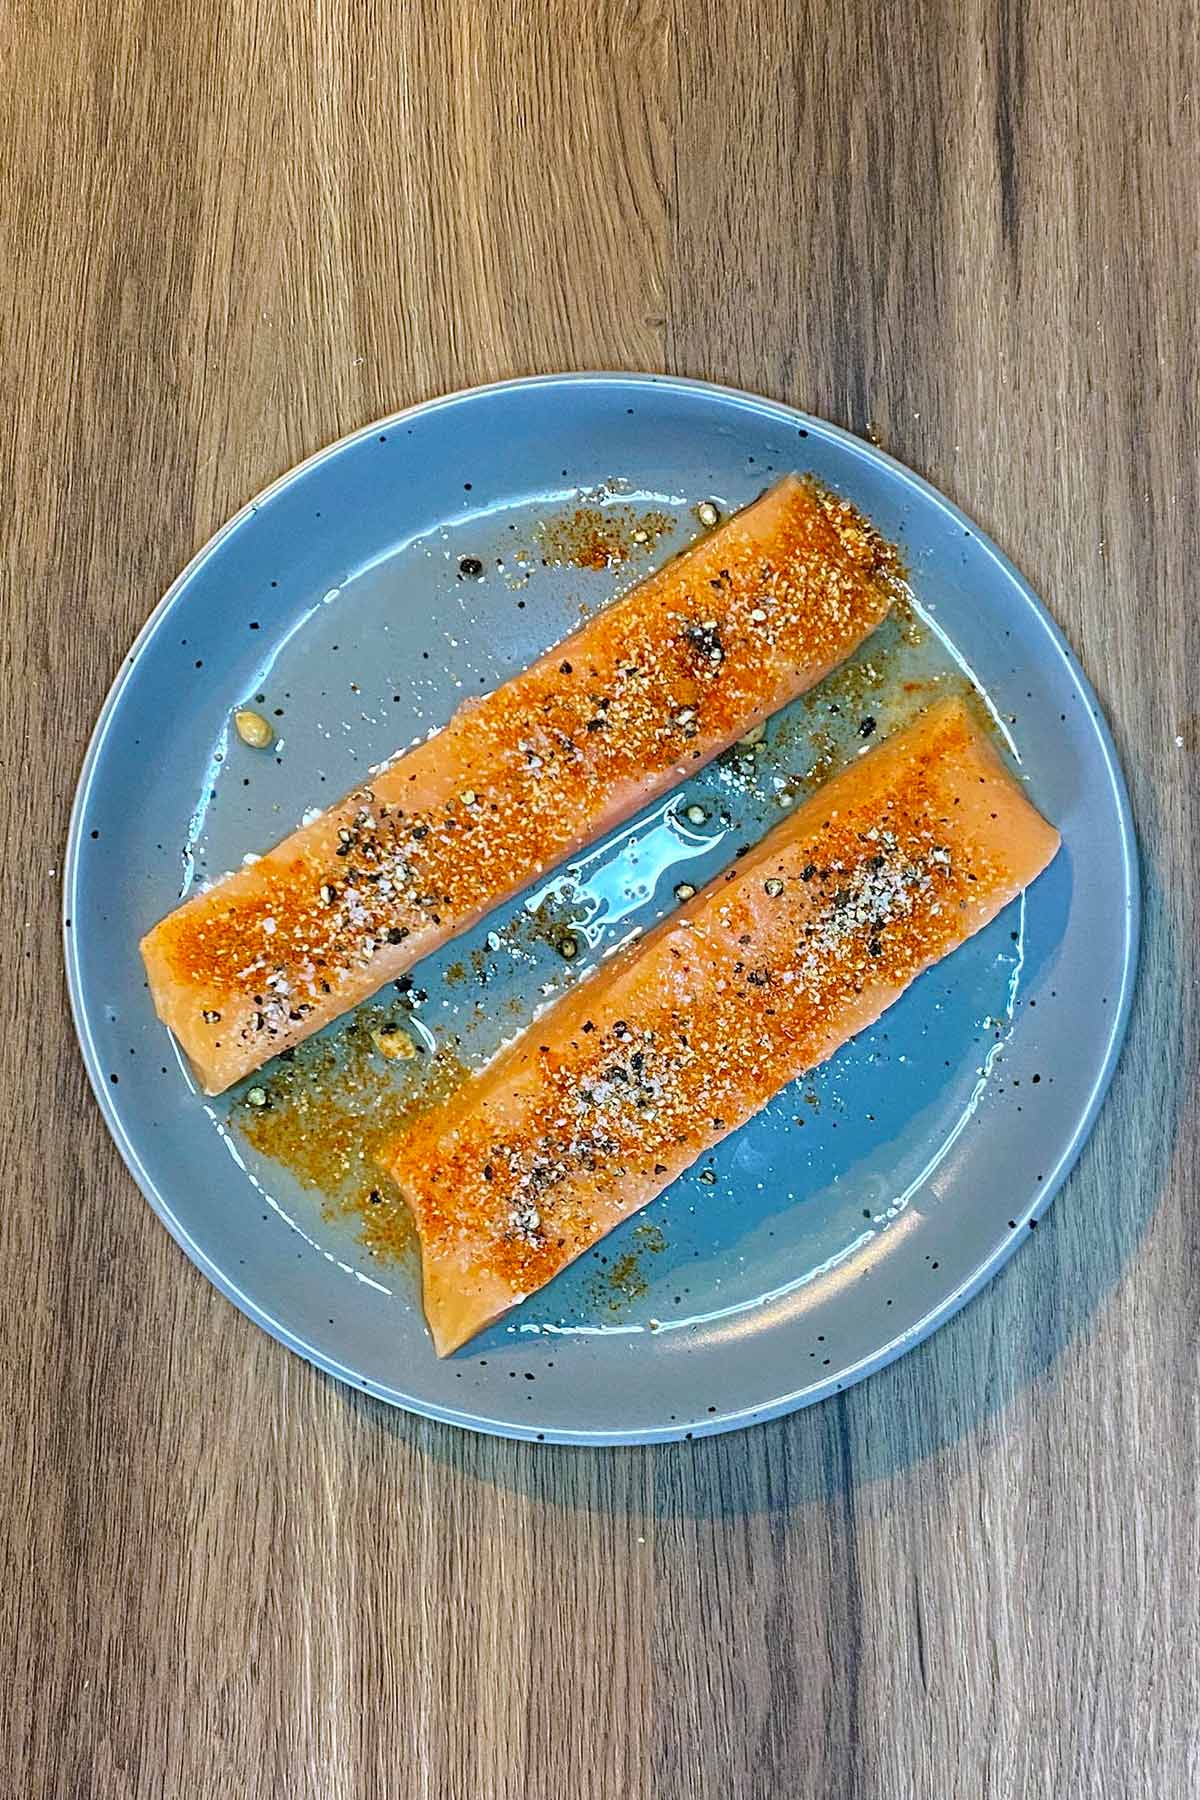 Two salmon fillets coated in seasoning.